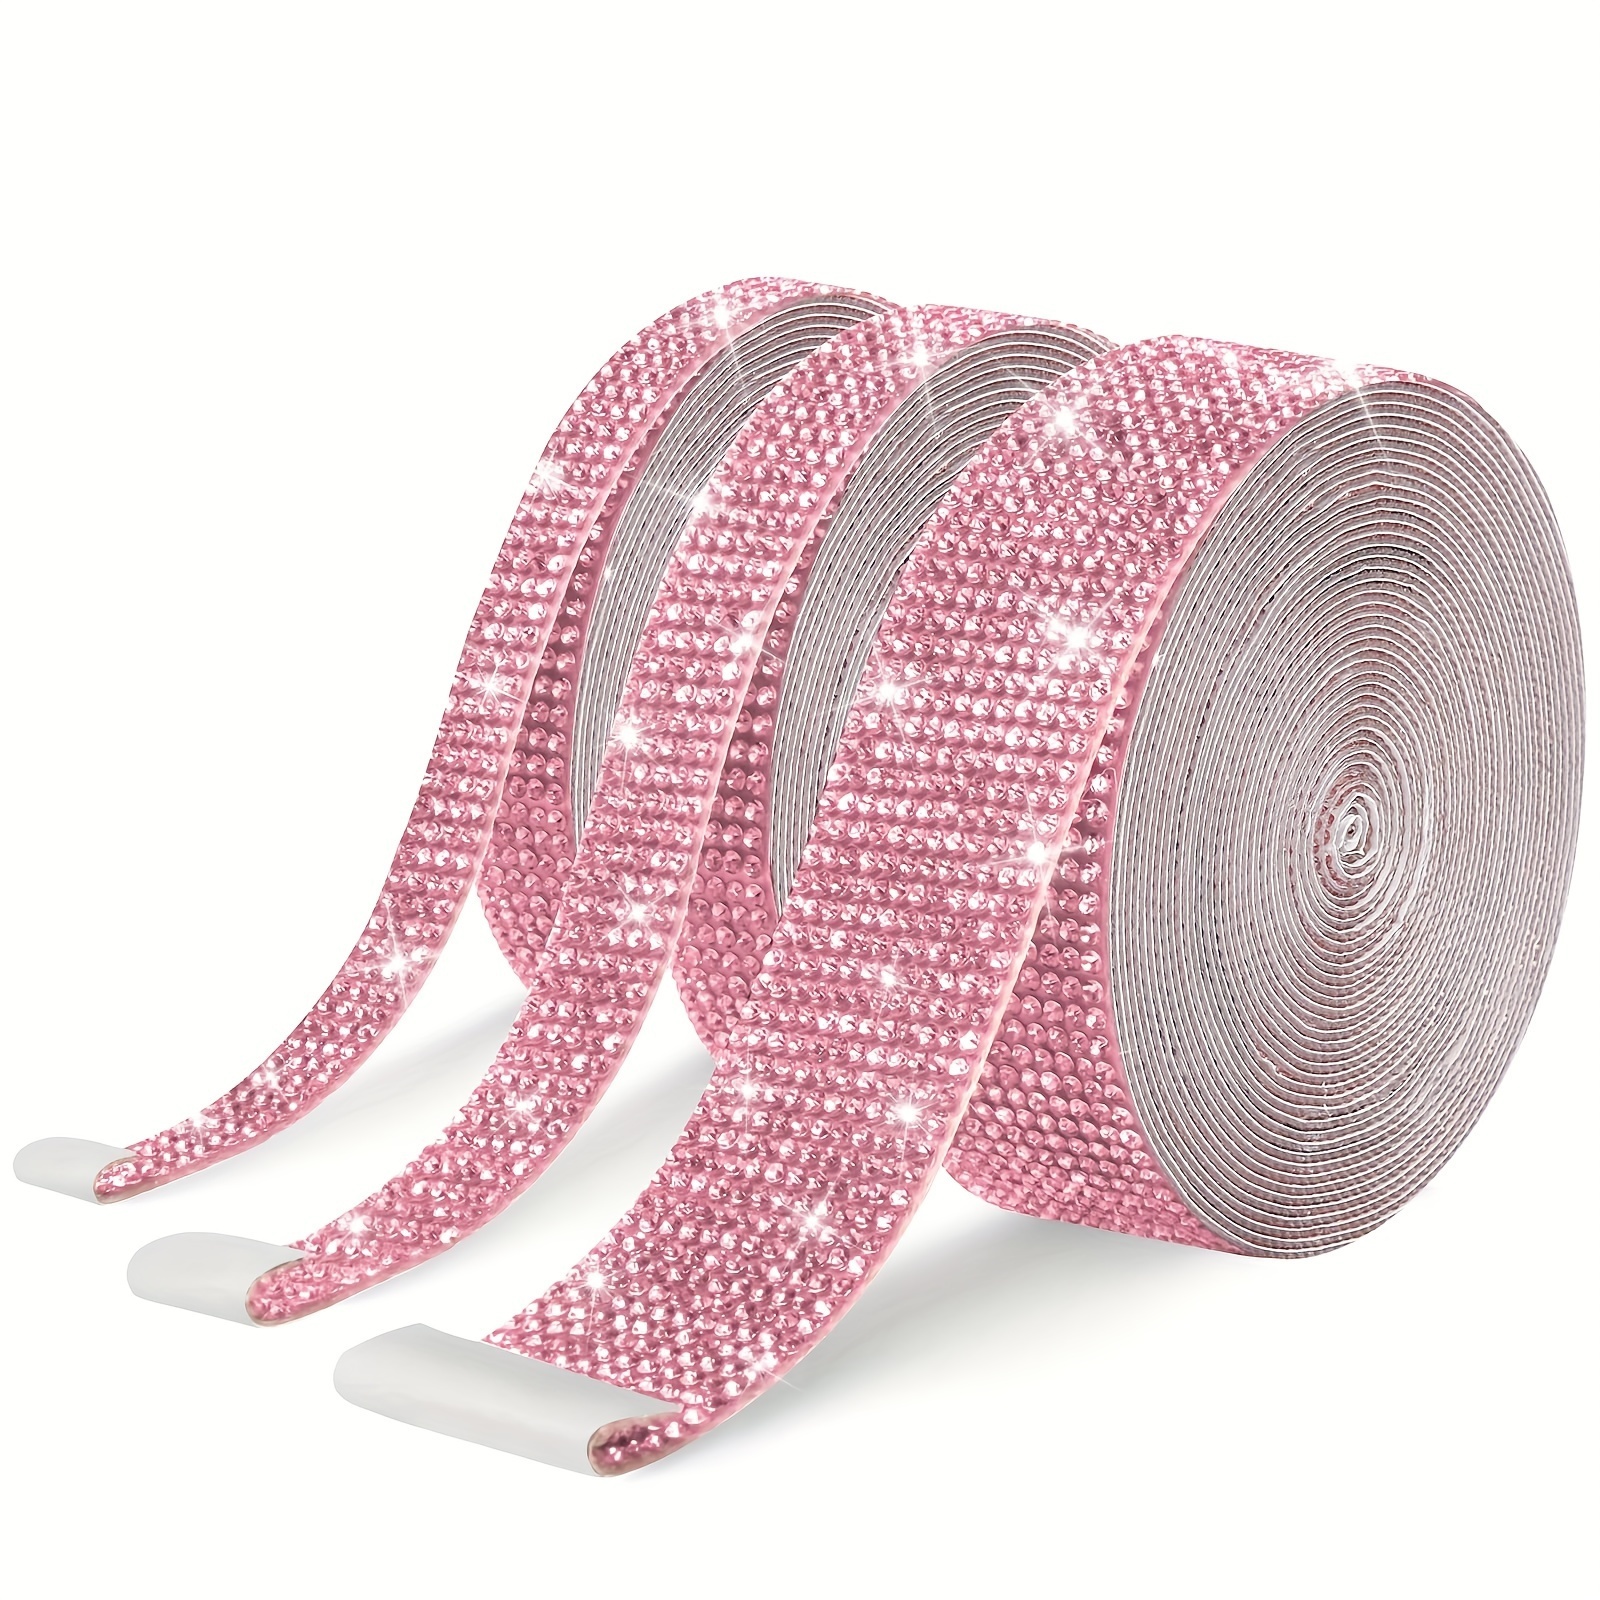 

Sparkle Up Your Life With 1 Yard Of Pink Self-adhesive Crystal Rhinestone Bling Stickers!